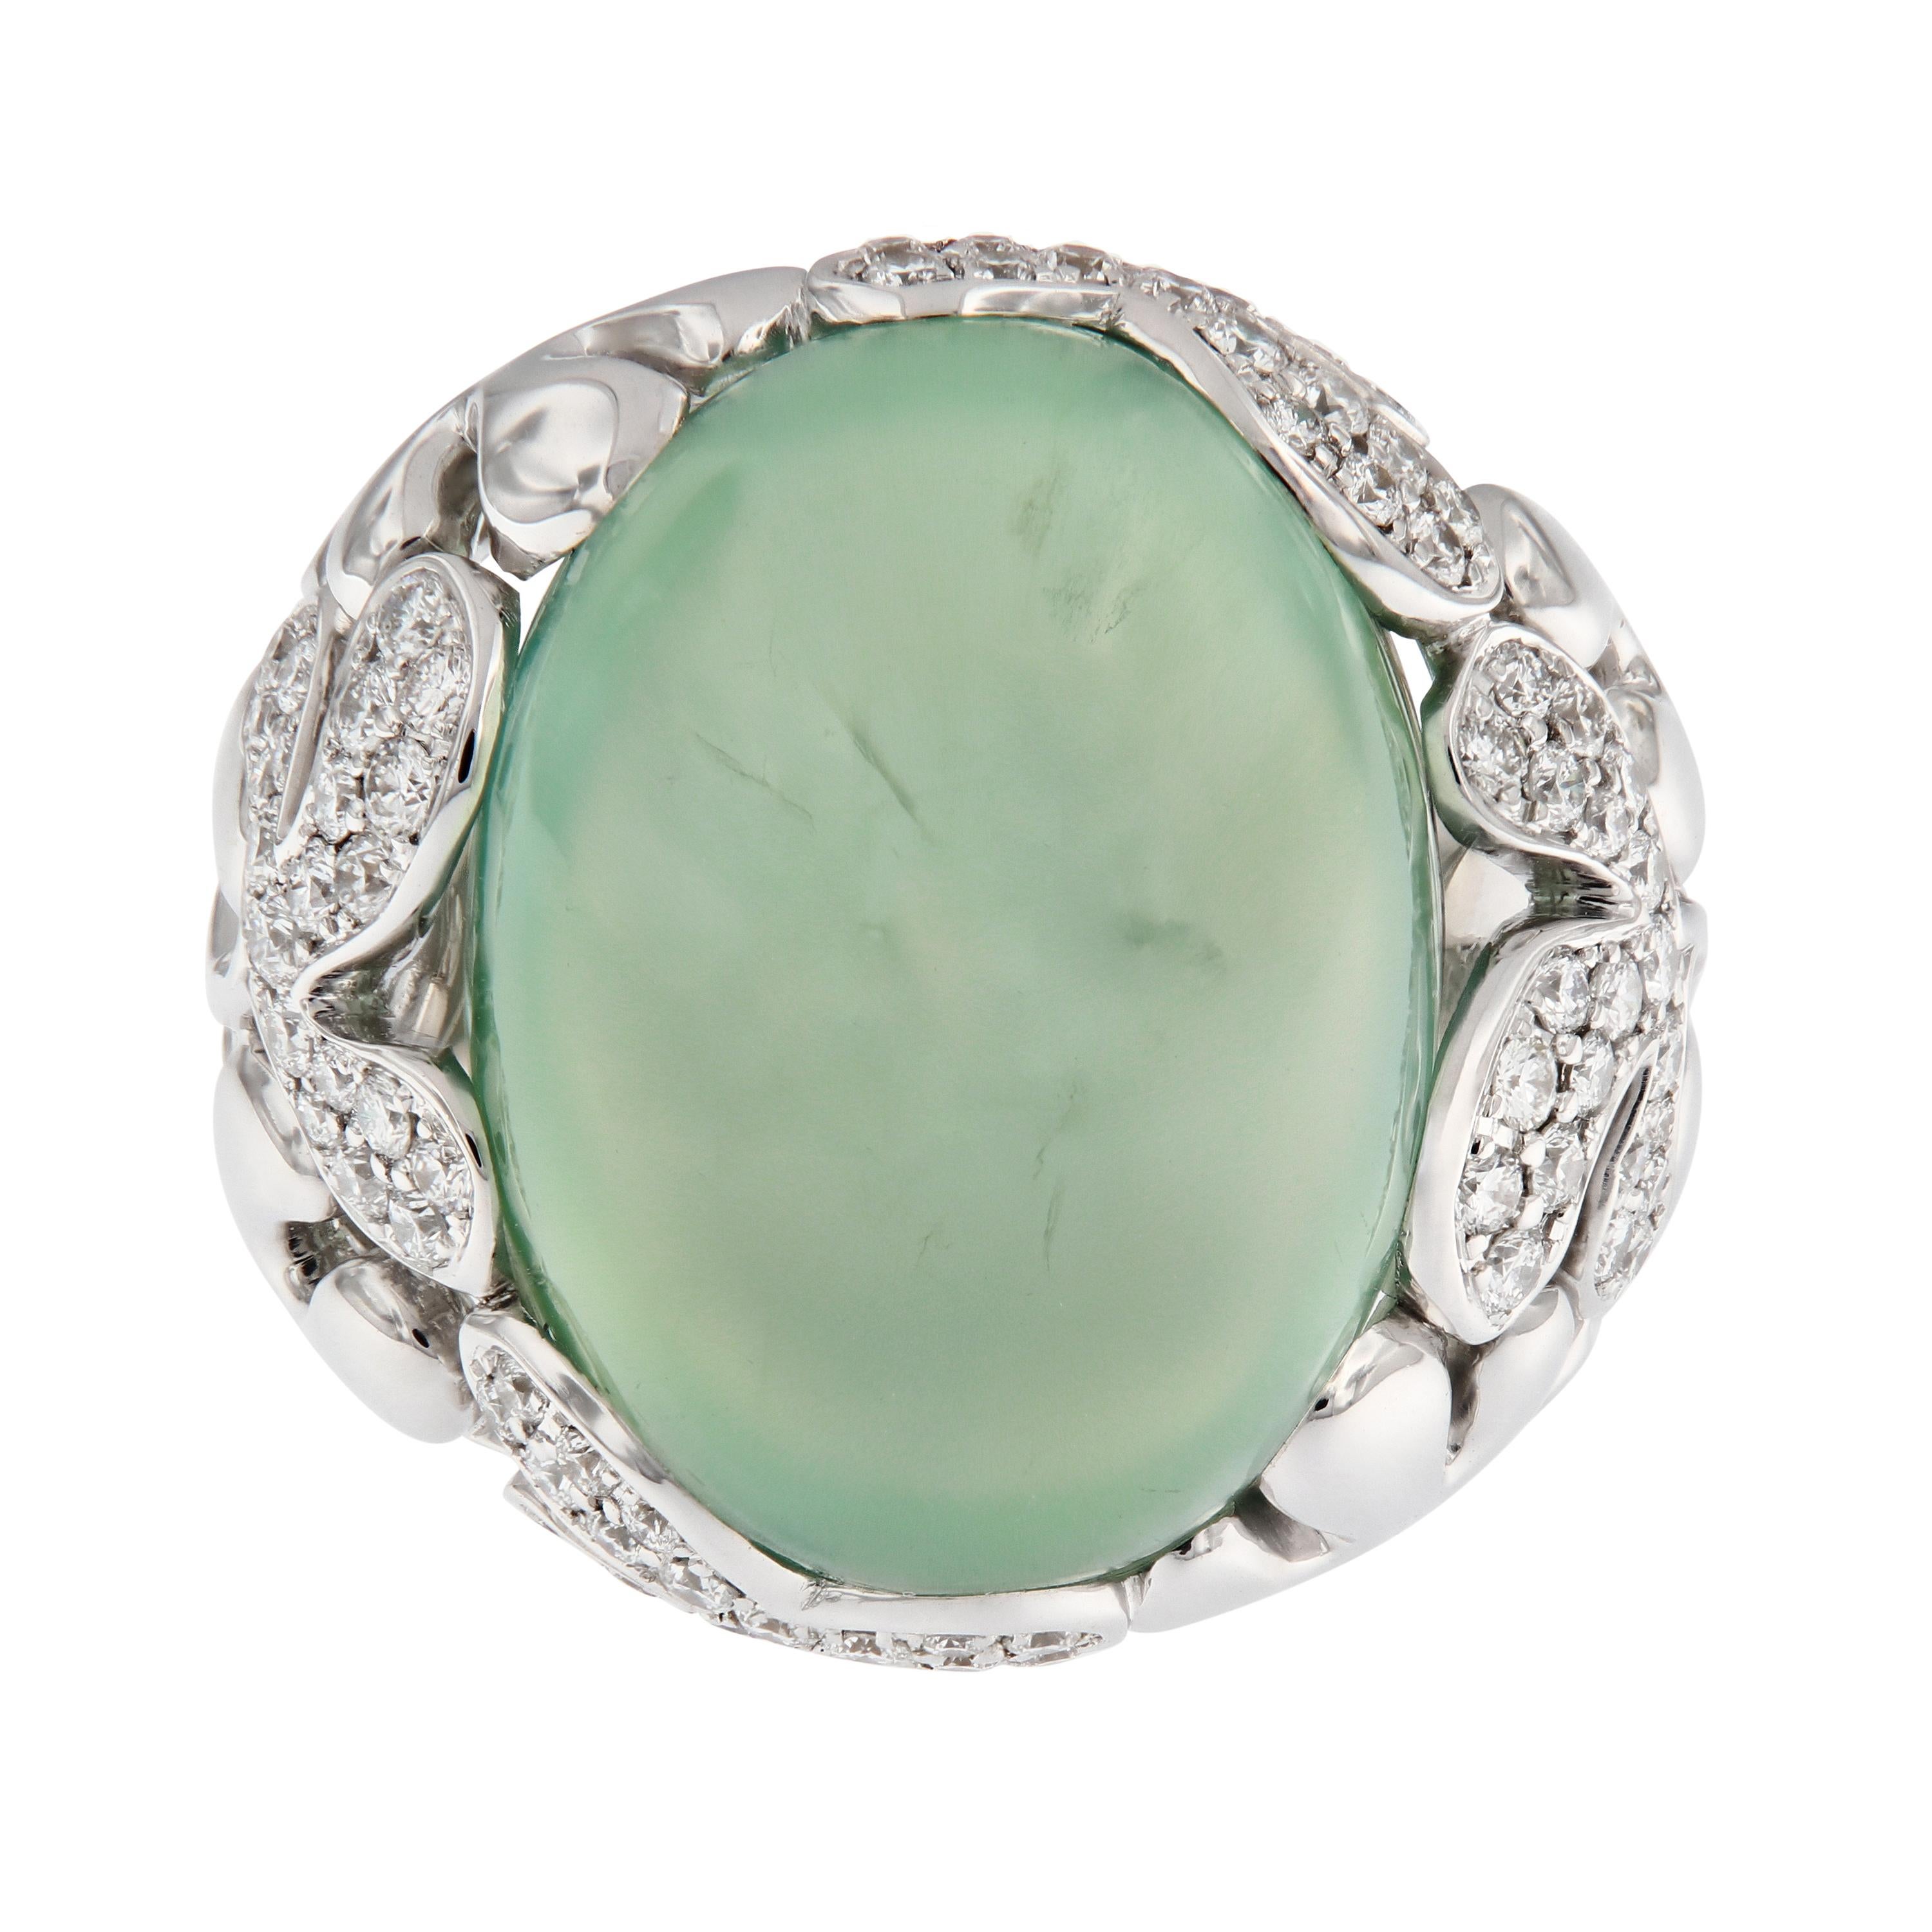 A whimsical floral design graces the setting of this large stunning cabochon-cut prehnite. The ring is beautifully crafted in 18k white gold and accented with diamonds. The combination of stone and design is feminine and presents a substantial but